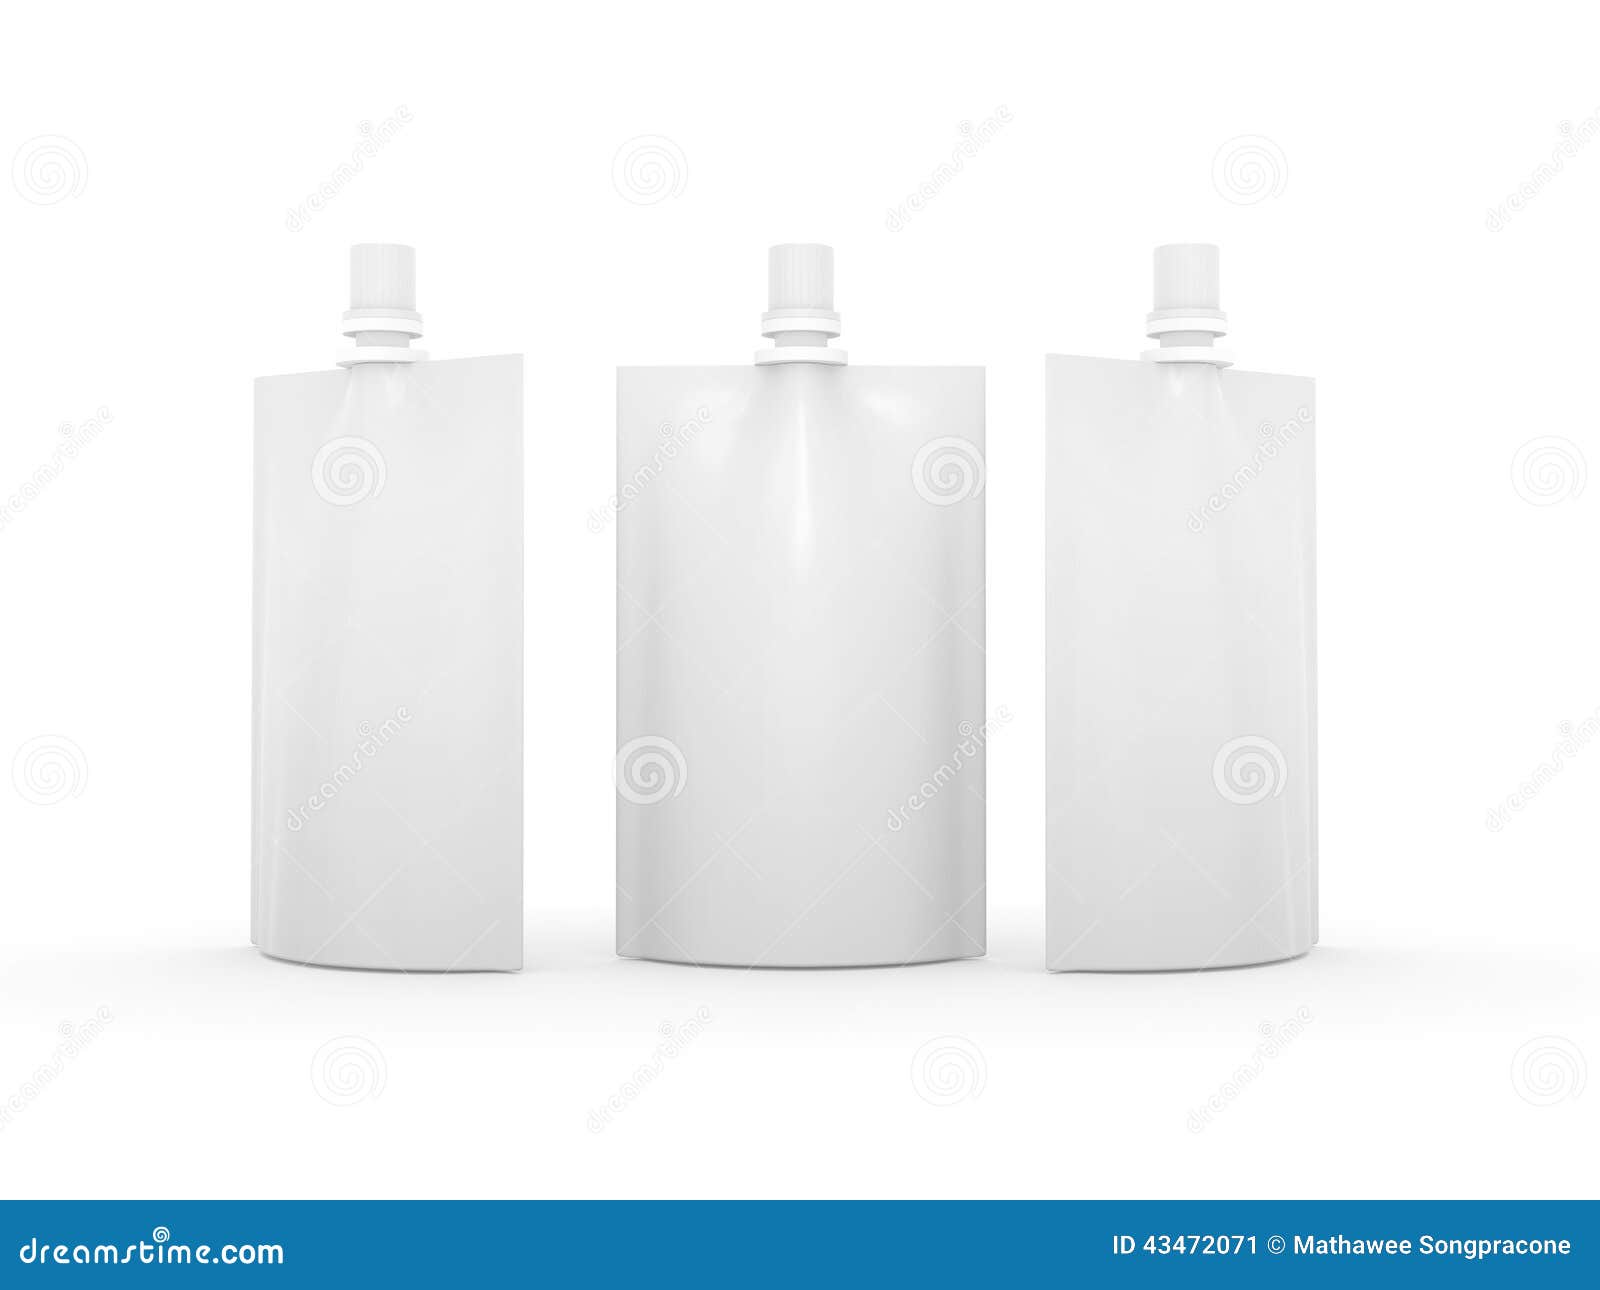 Download White Blank Juice Bag Packaging With Spout Lid, Clipping ...